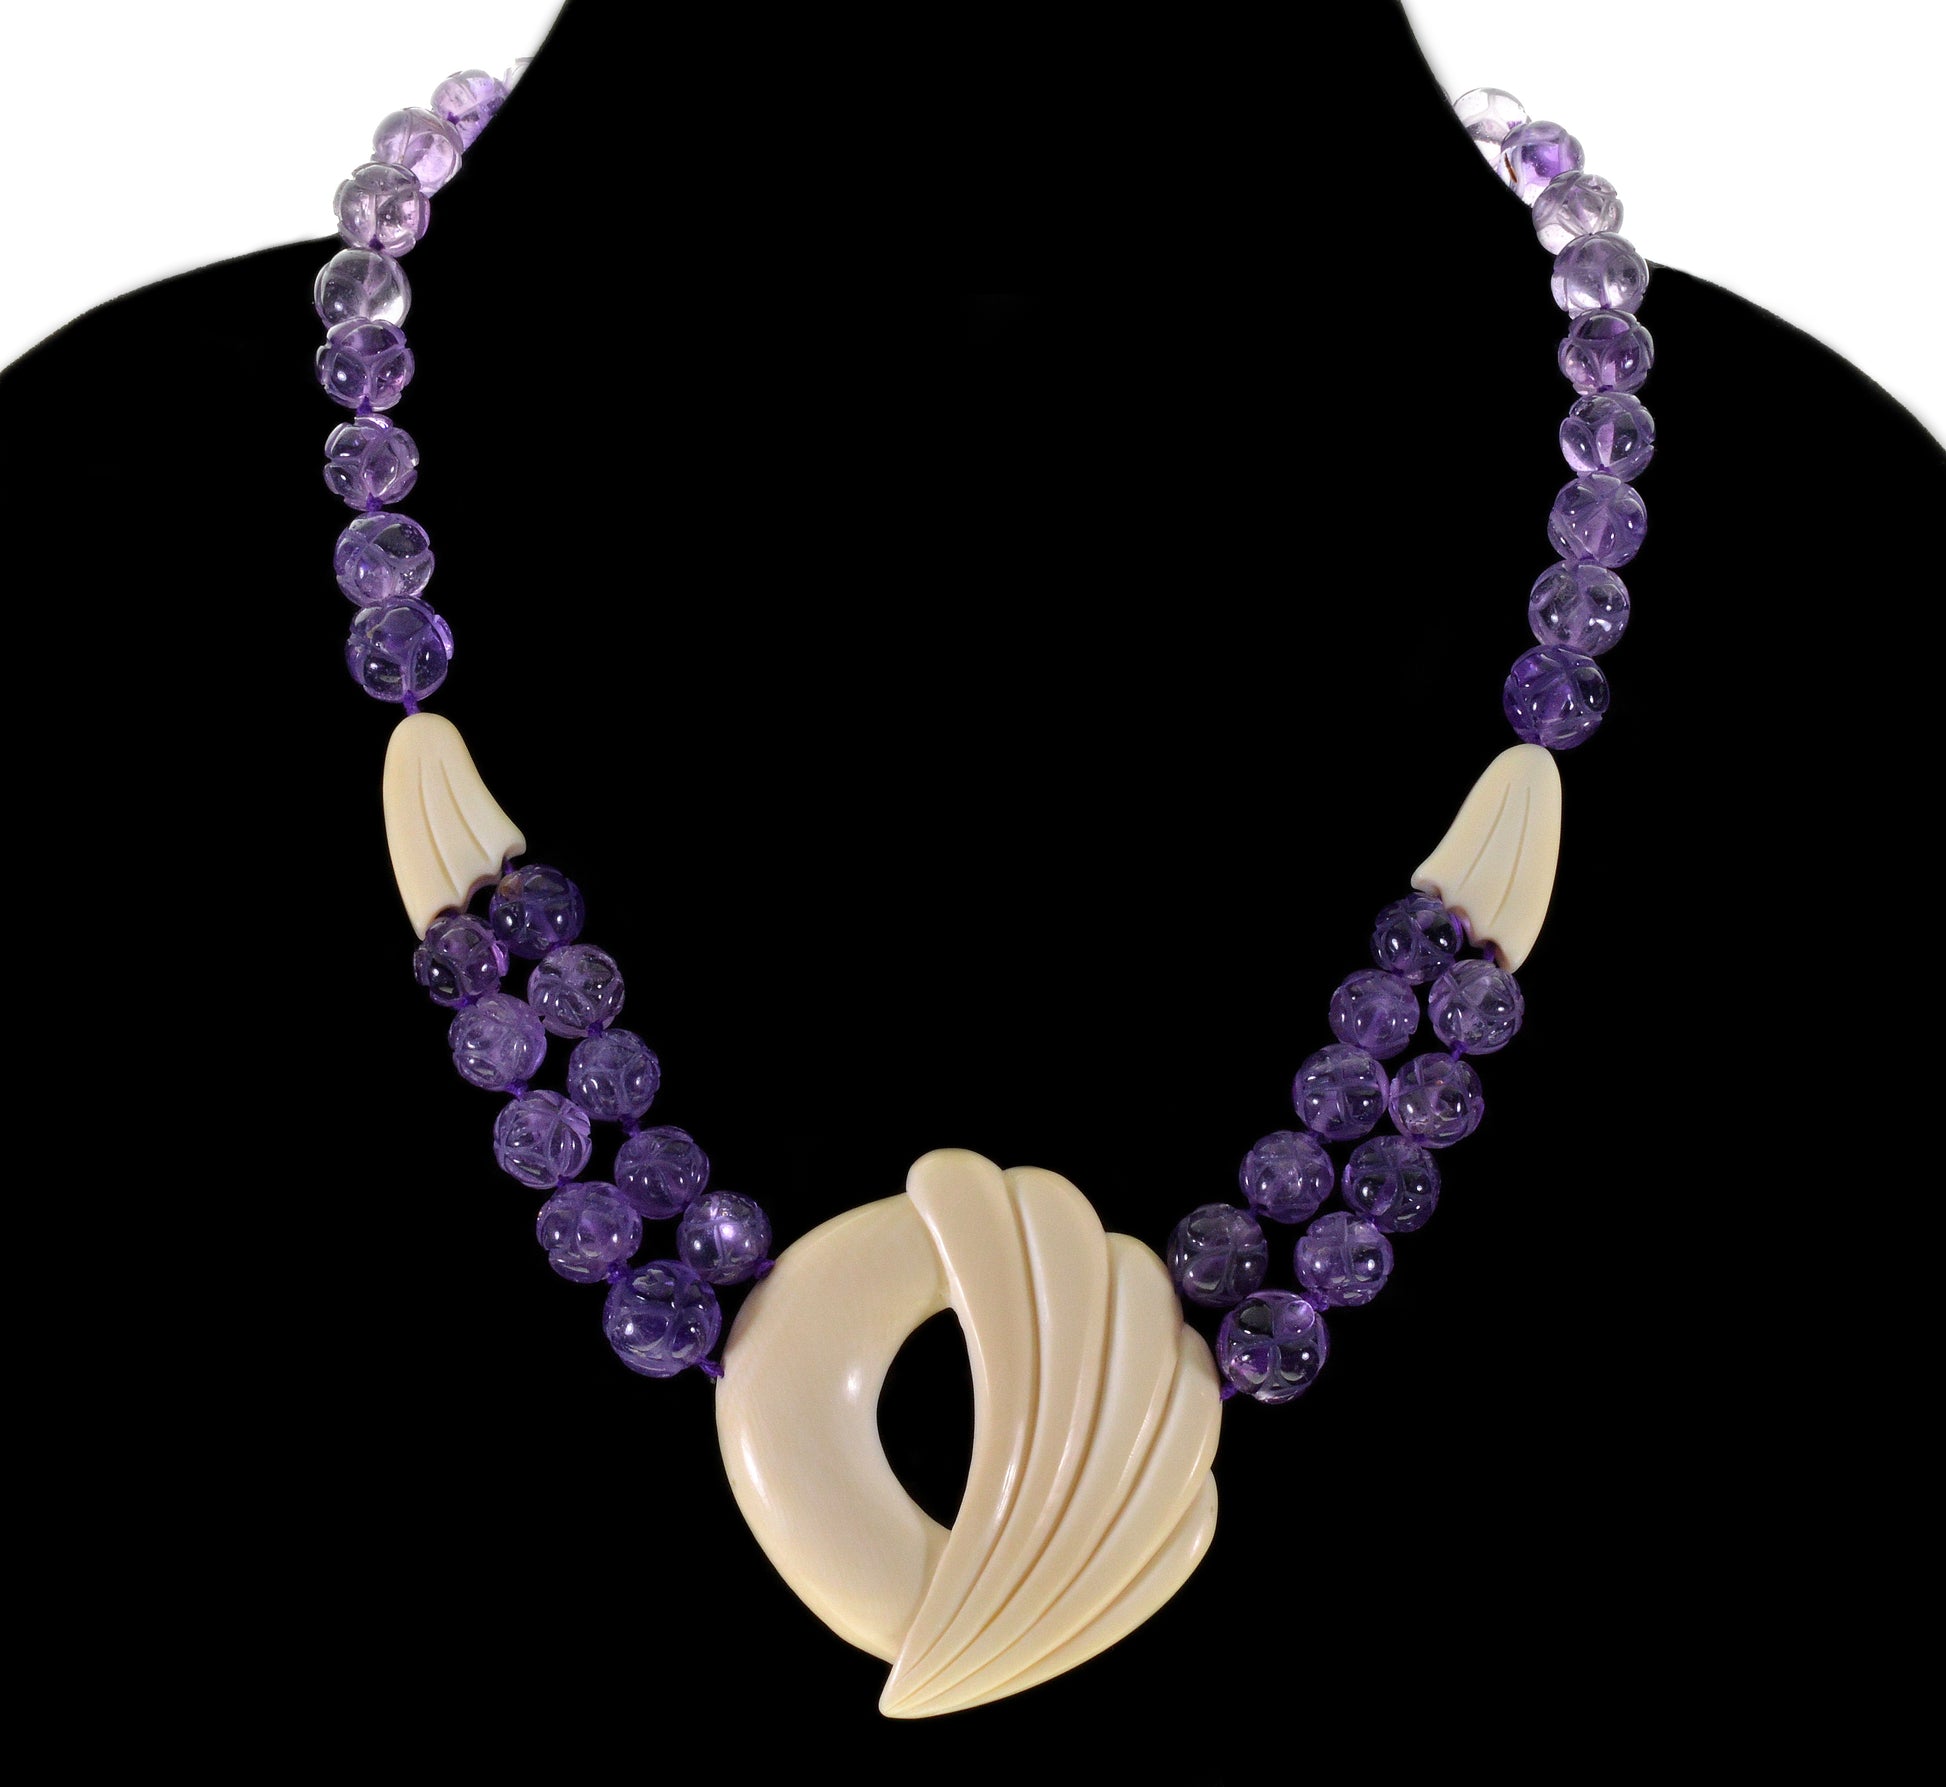 Antique Art Deco Carved Amethyst Bead Necklace C.1920 003568